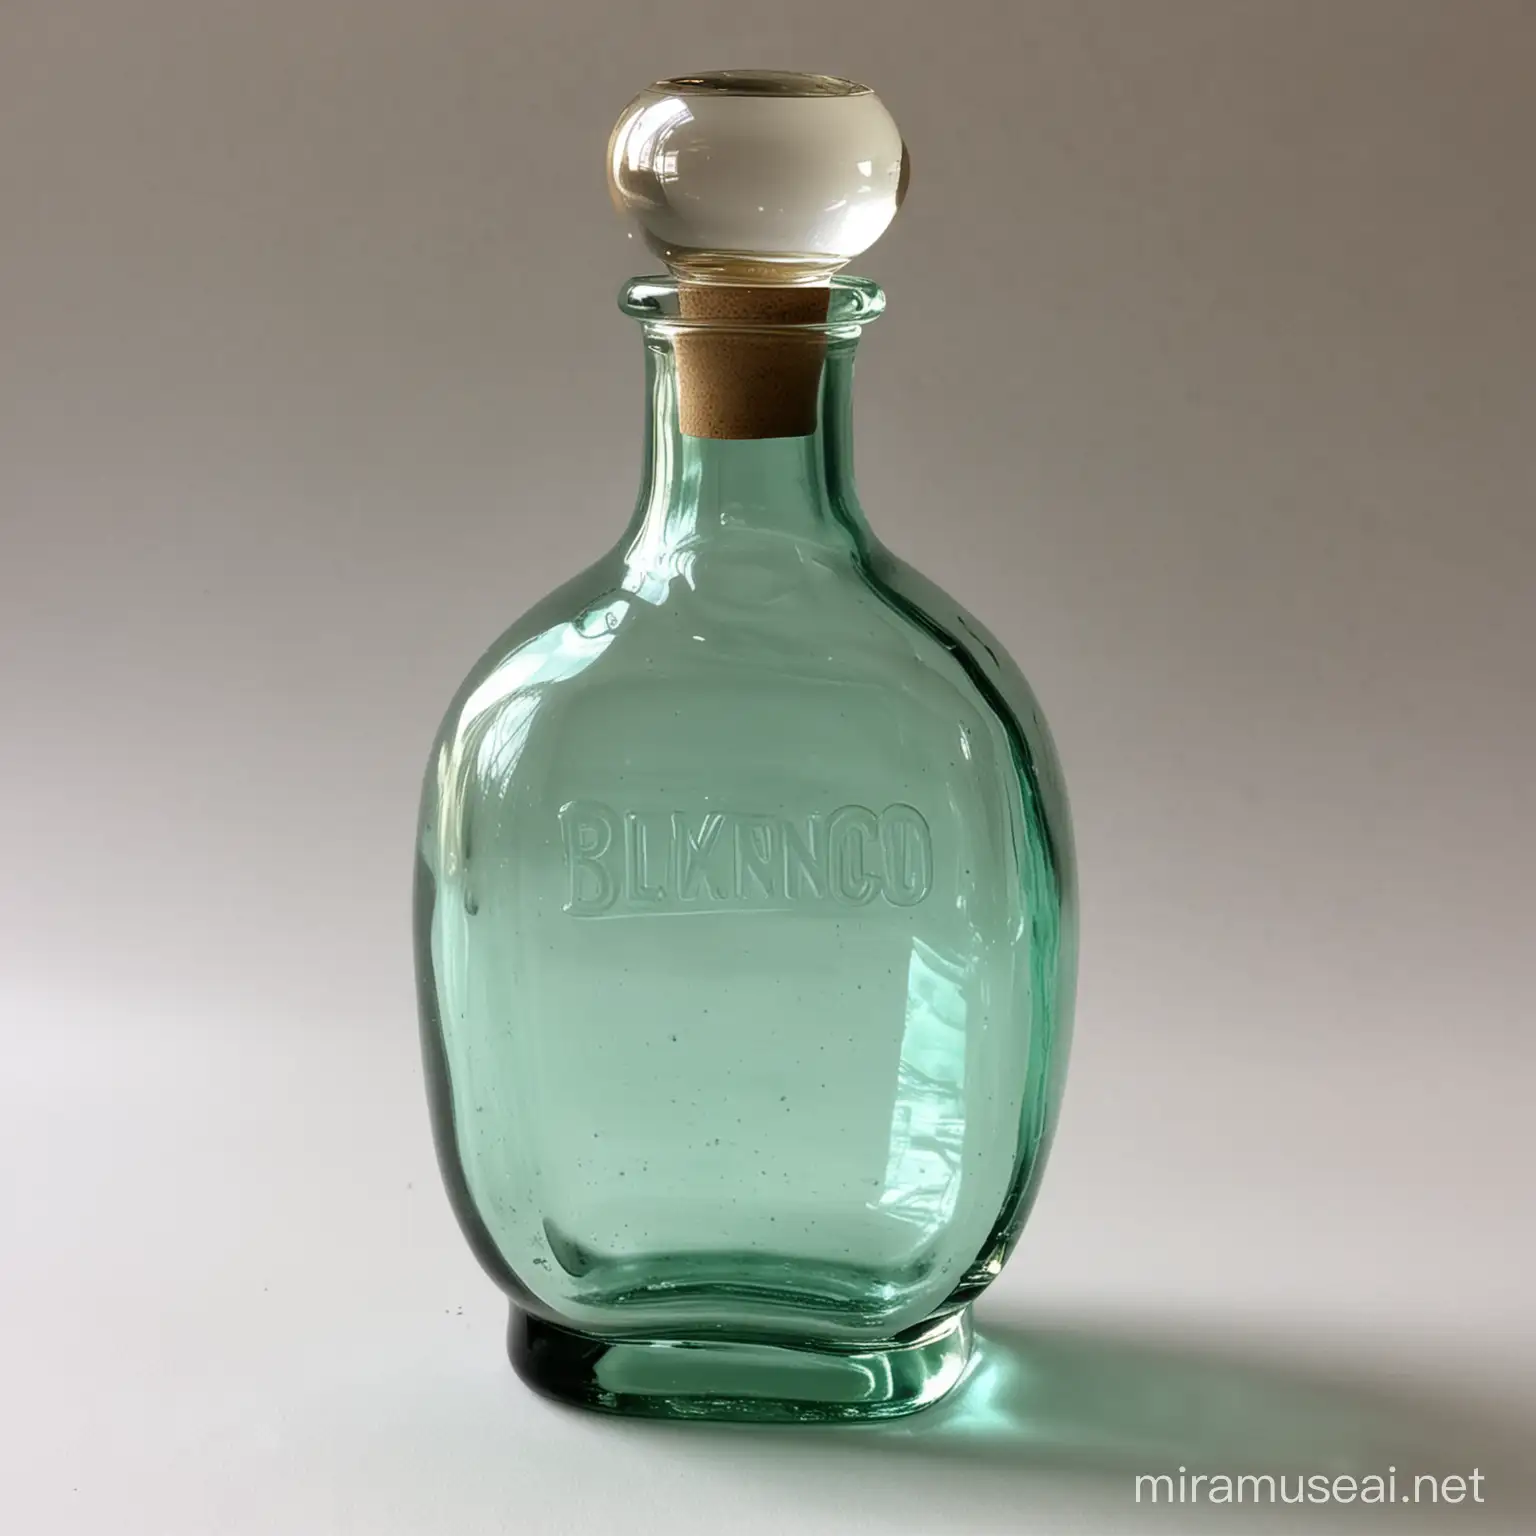 Vintage Blenko Glass Fragrance Bottle with Timeless Imperfections